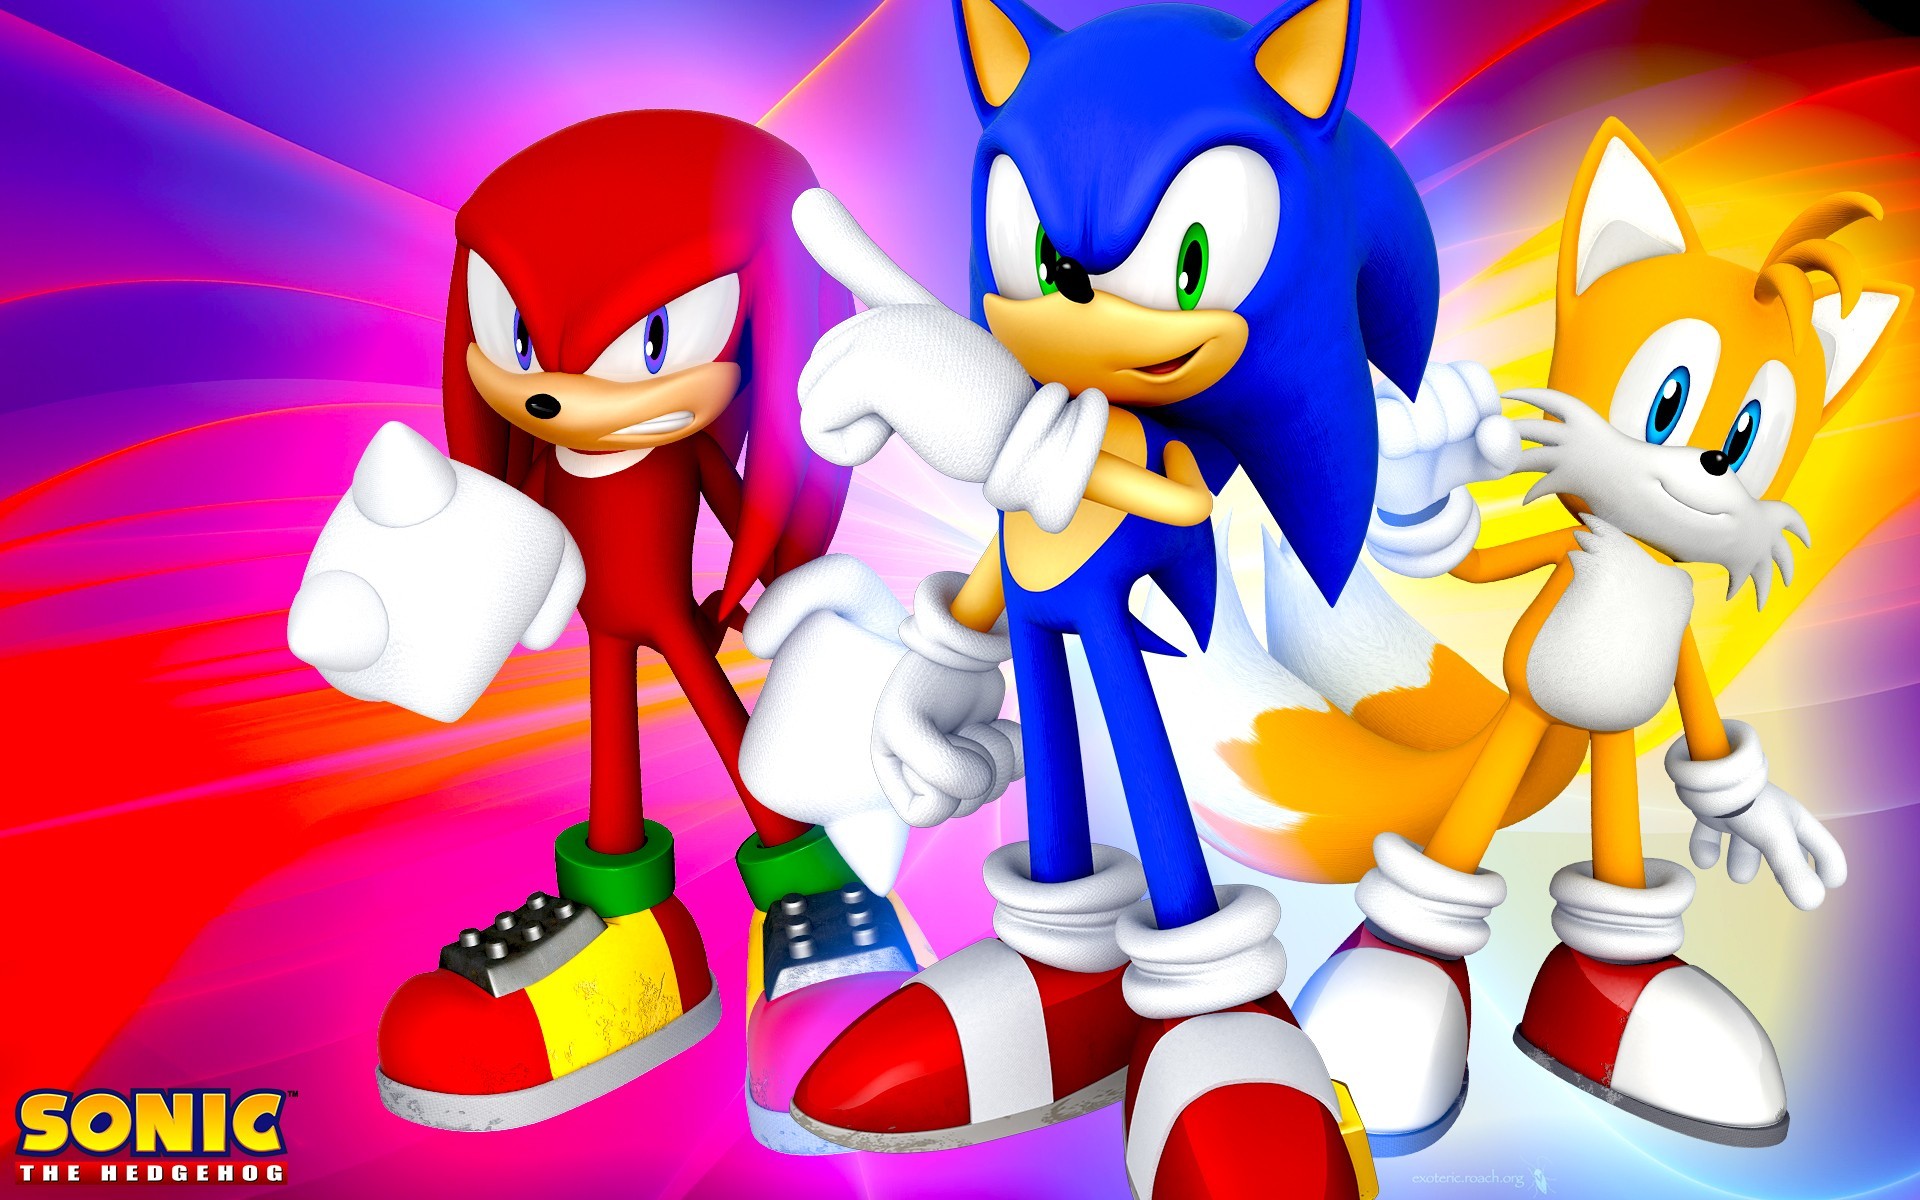 1920x1200 Video Game - Sonic the Hedgehog Miles "Tails" Prower Knuckles the Echidna  Wallpaper